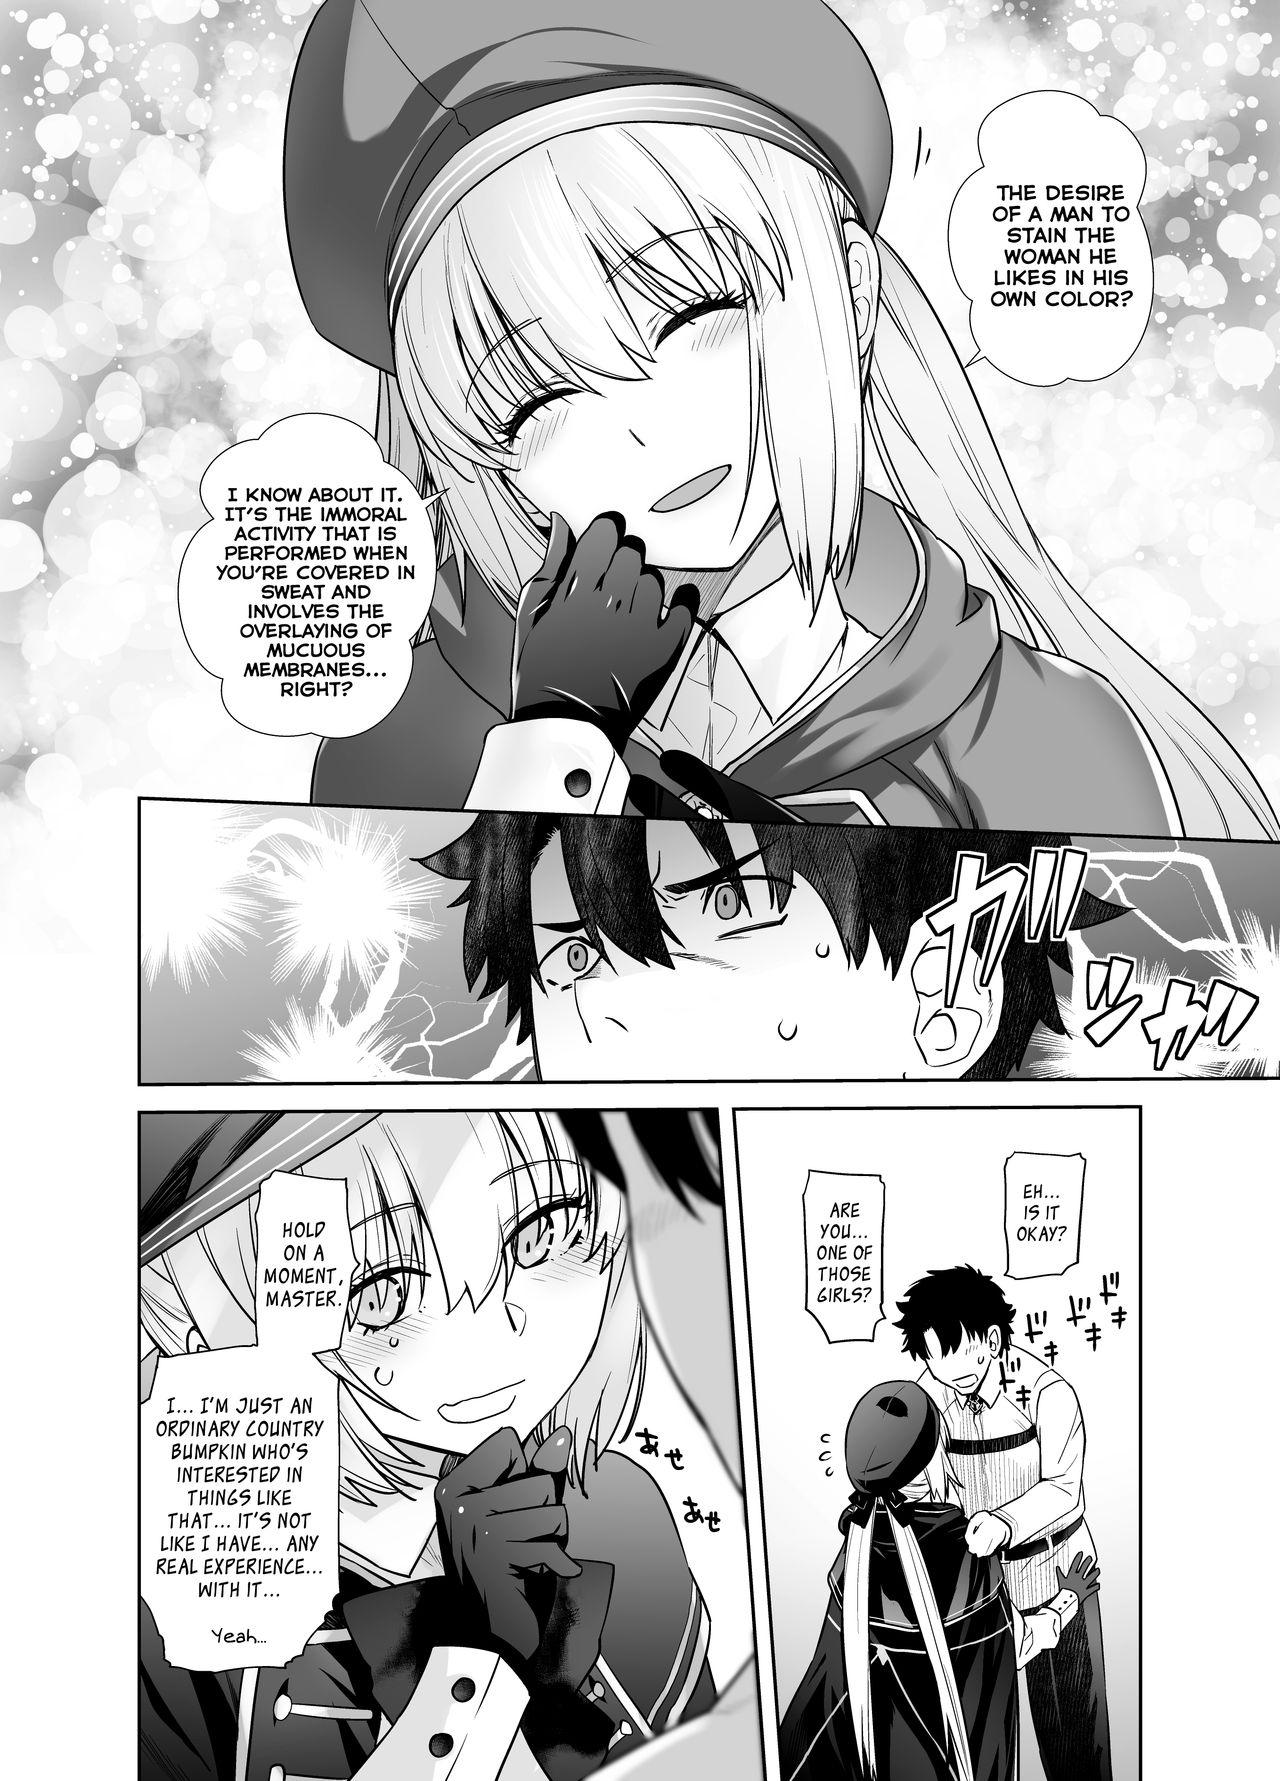 Spanking HEAVEN'S DRIVE 6 - Fate grand order Big Boobs - Page 8